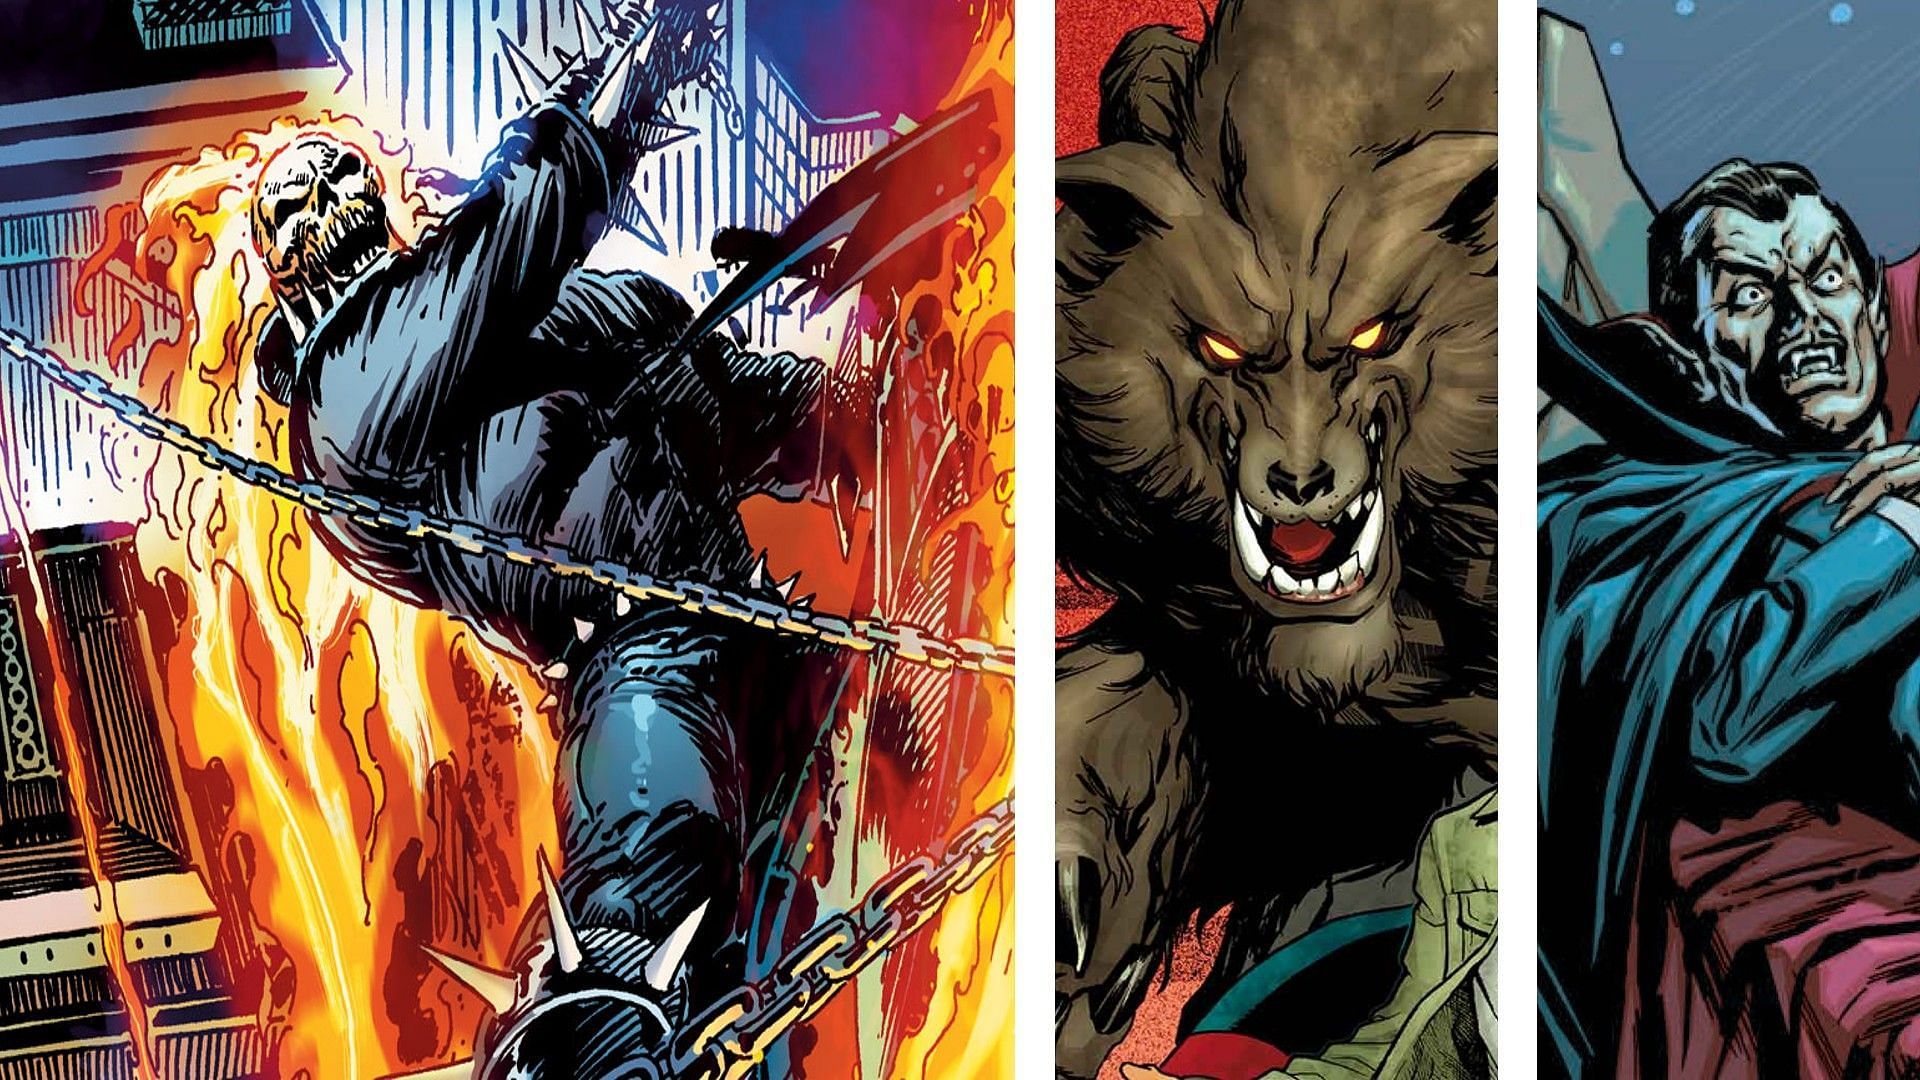 Ghost Rider, Werewolf by Night, and Dracula (Images via Marvel Comics)